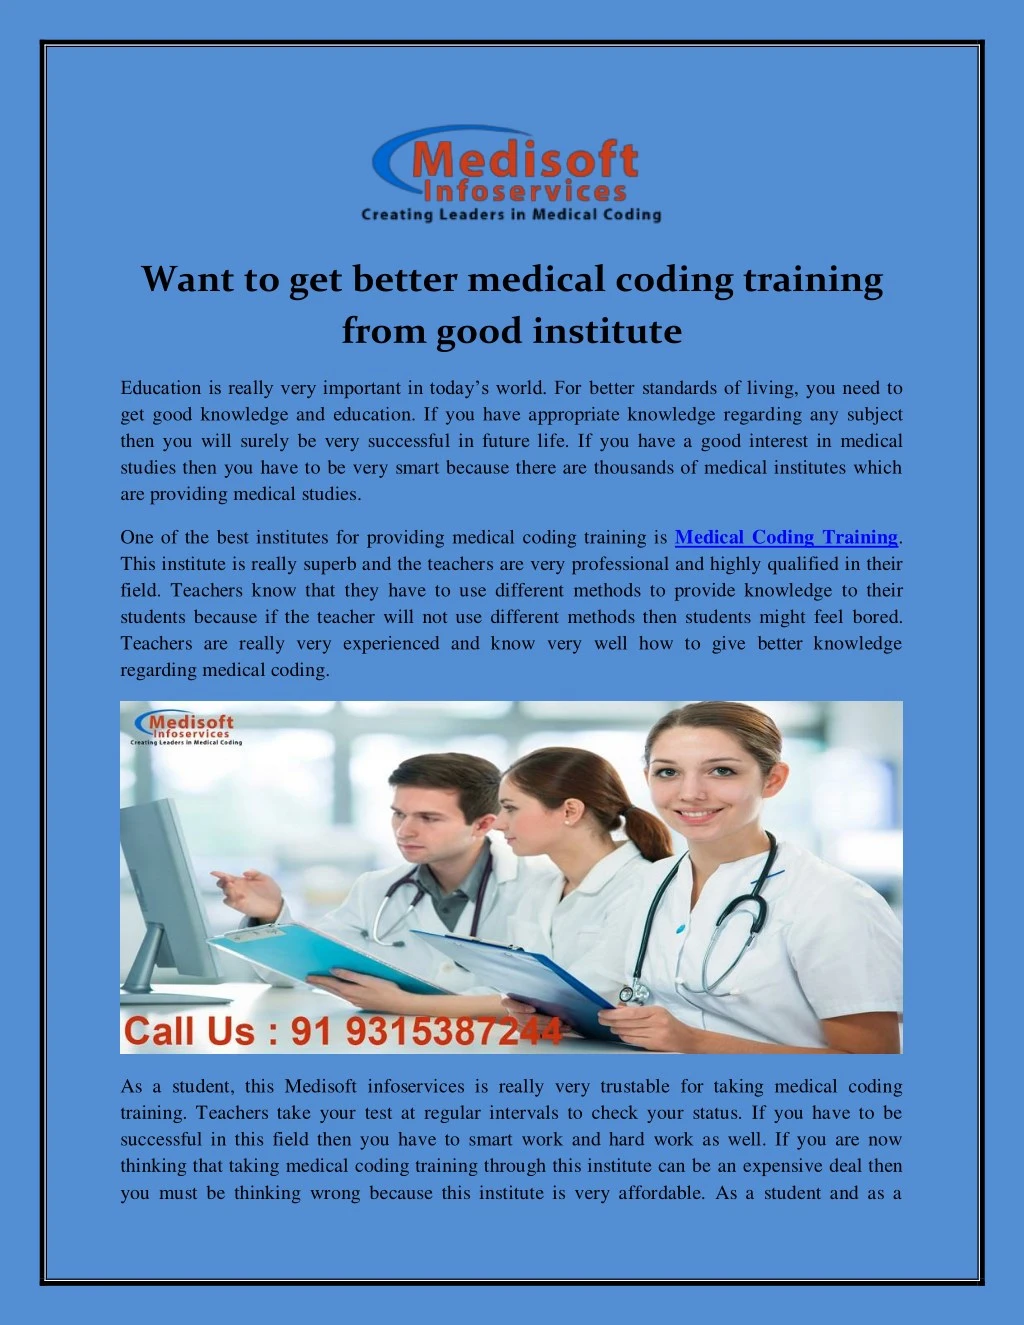 want to get better medical coding training from